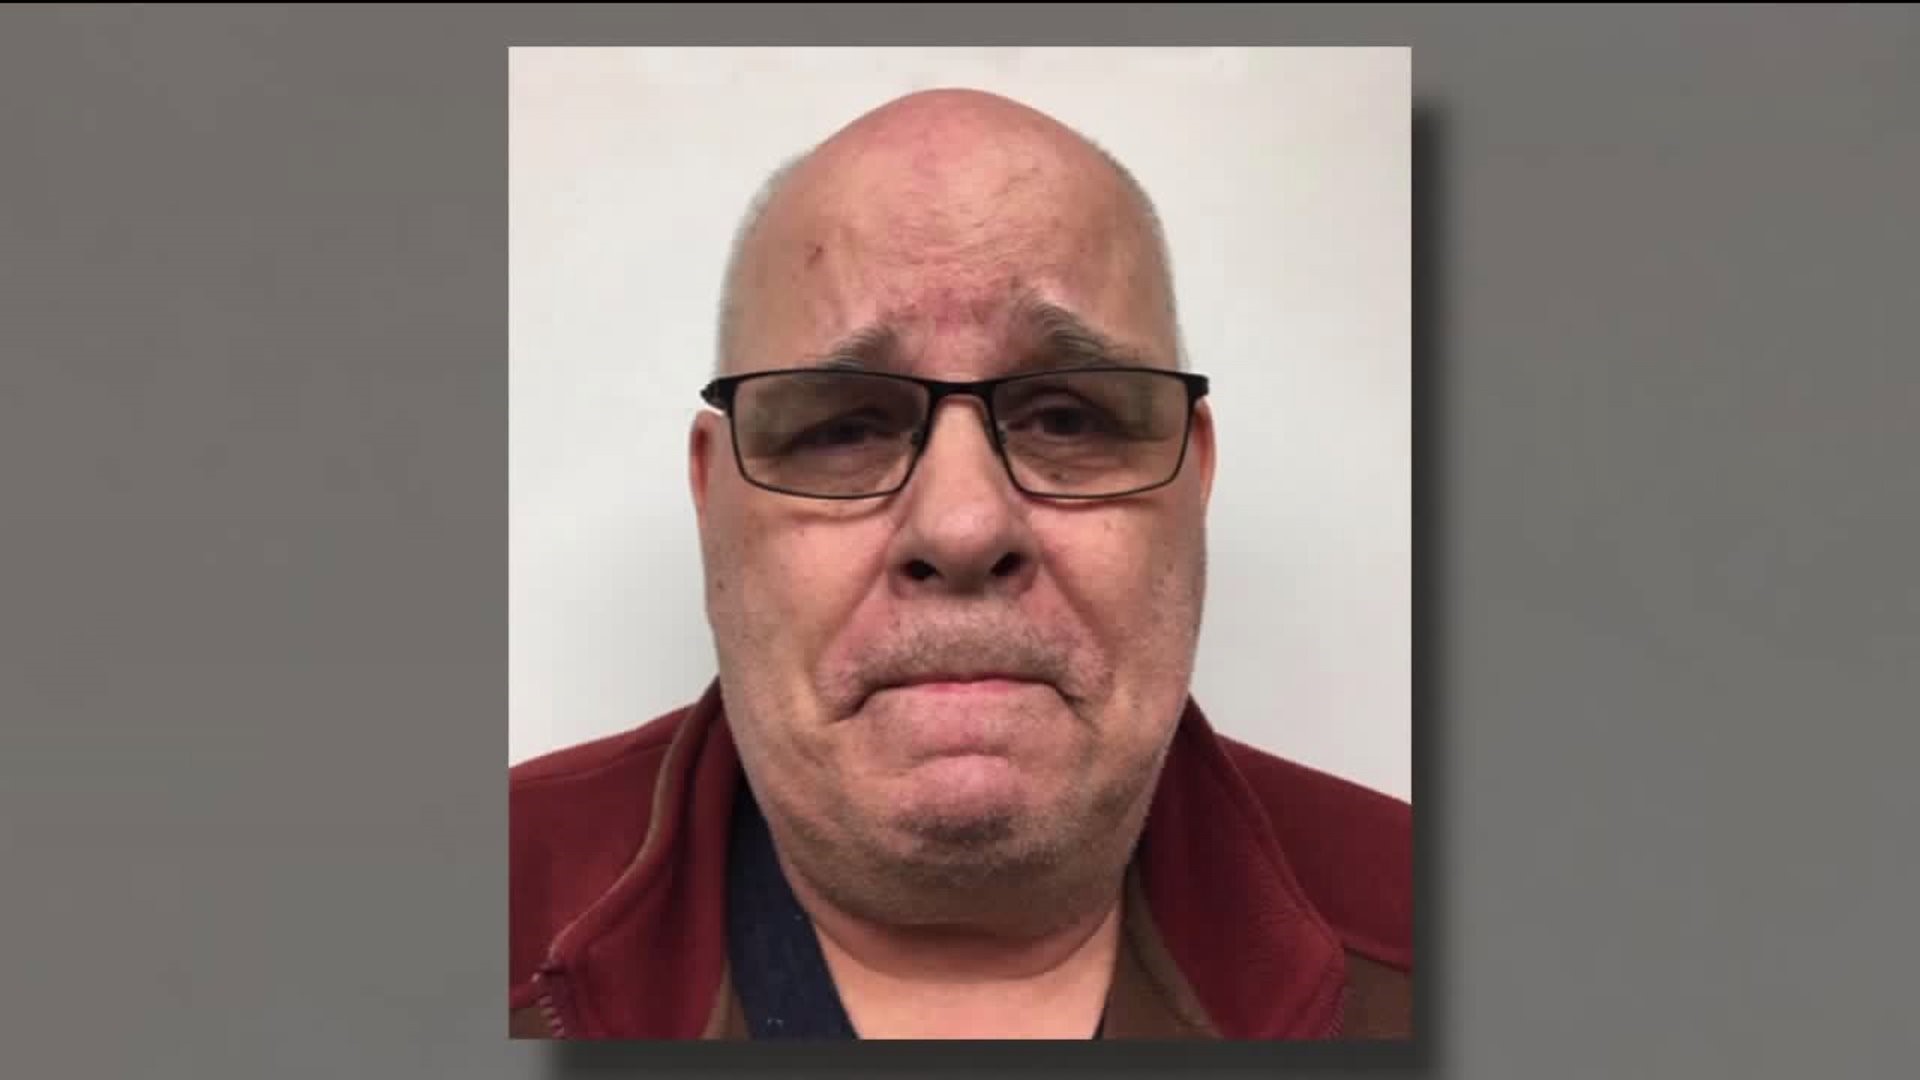 Middle School Teacher Porn - Middle School Basketball Coach, Retired Teacher Faces Child Porn Charges |  wnep.com